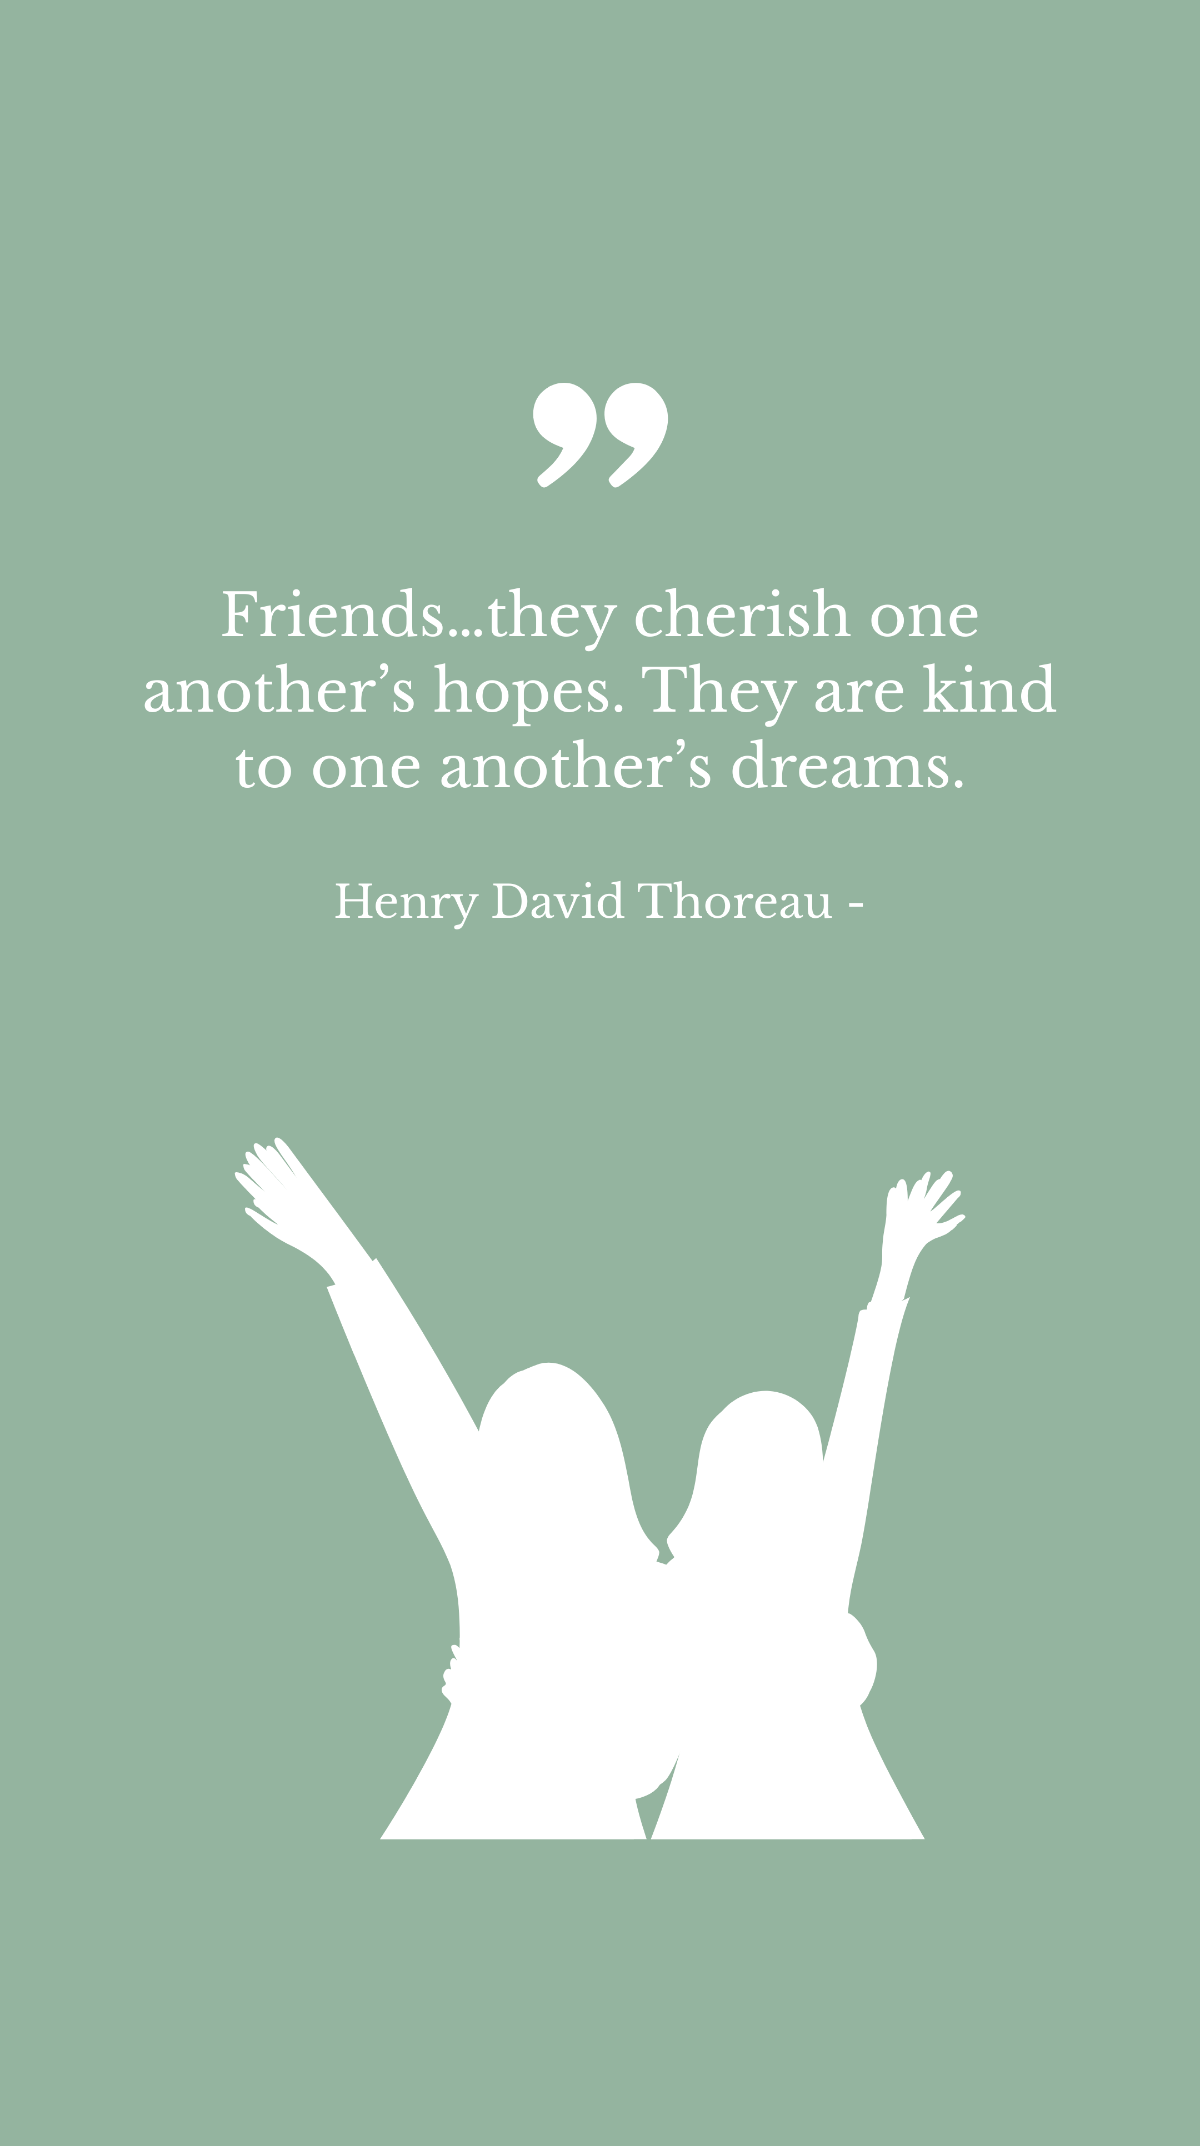 Henry David Thoreau - Friends…they cherish one another’s hopes. They are kind to one another’s dreams. Template